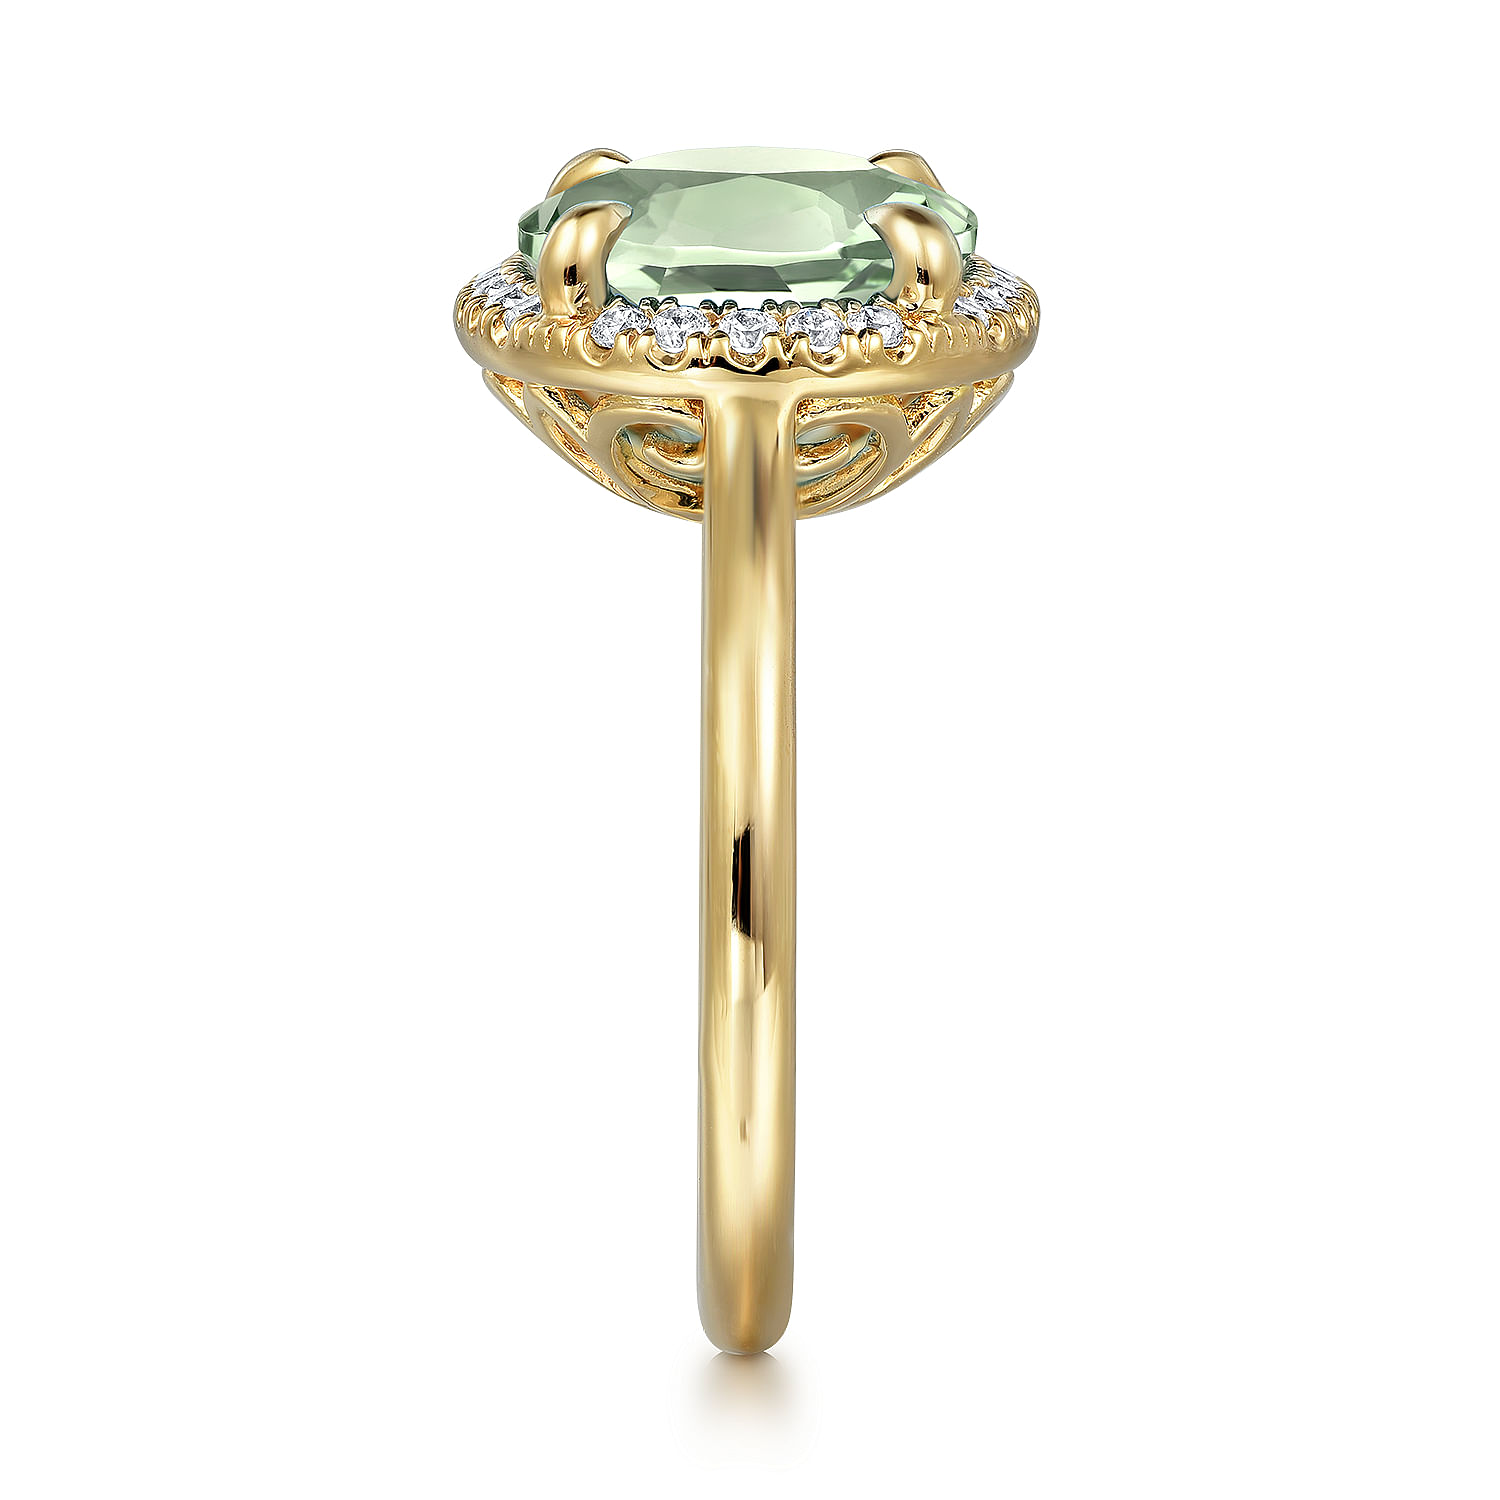 14K Yellow Gold Diamond and Oval Shape Green Amethyst Ladies Ring With Flower Pattern Gallery